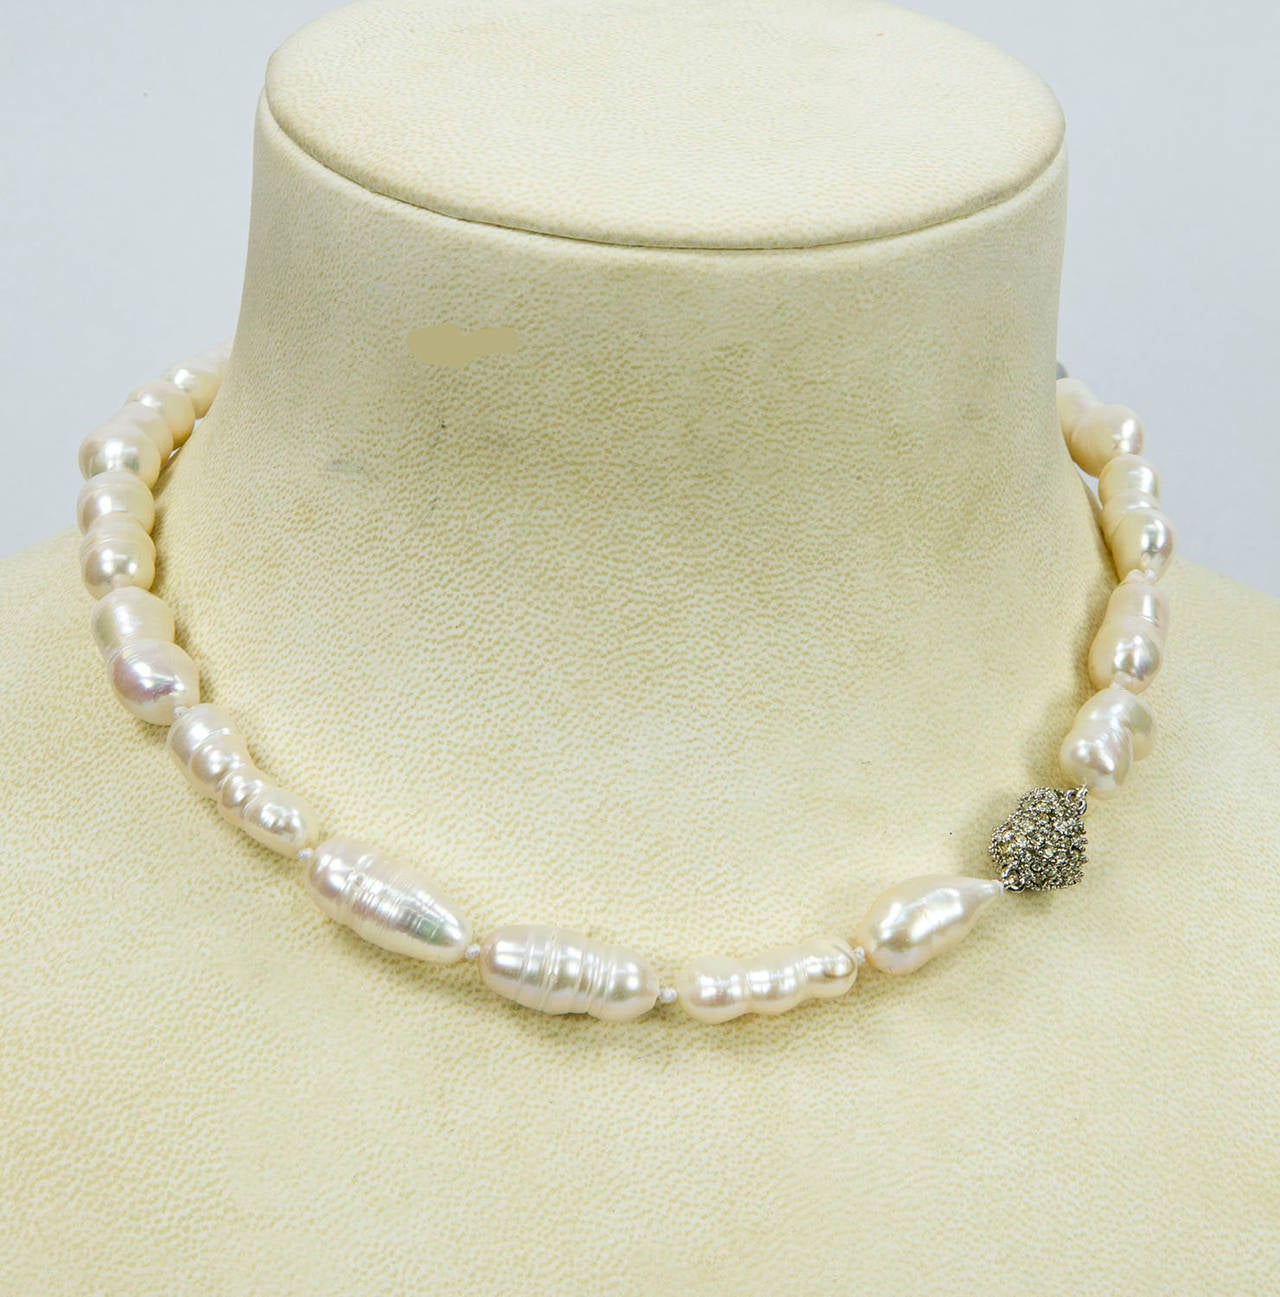 Unique shaped large white Freshwater Baroque Pearl Necklace; hand knotted held by a CZ encrusted Heart magnetic clasp; Pearls are approx. 16mm-21mm (most pearls measure 21mm long); strand measures approx. 16” long. Go anywhere in style with this